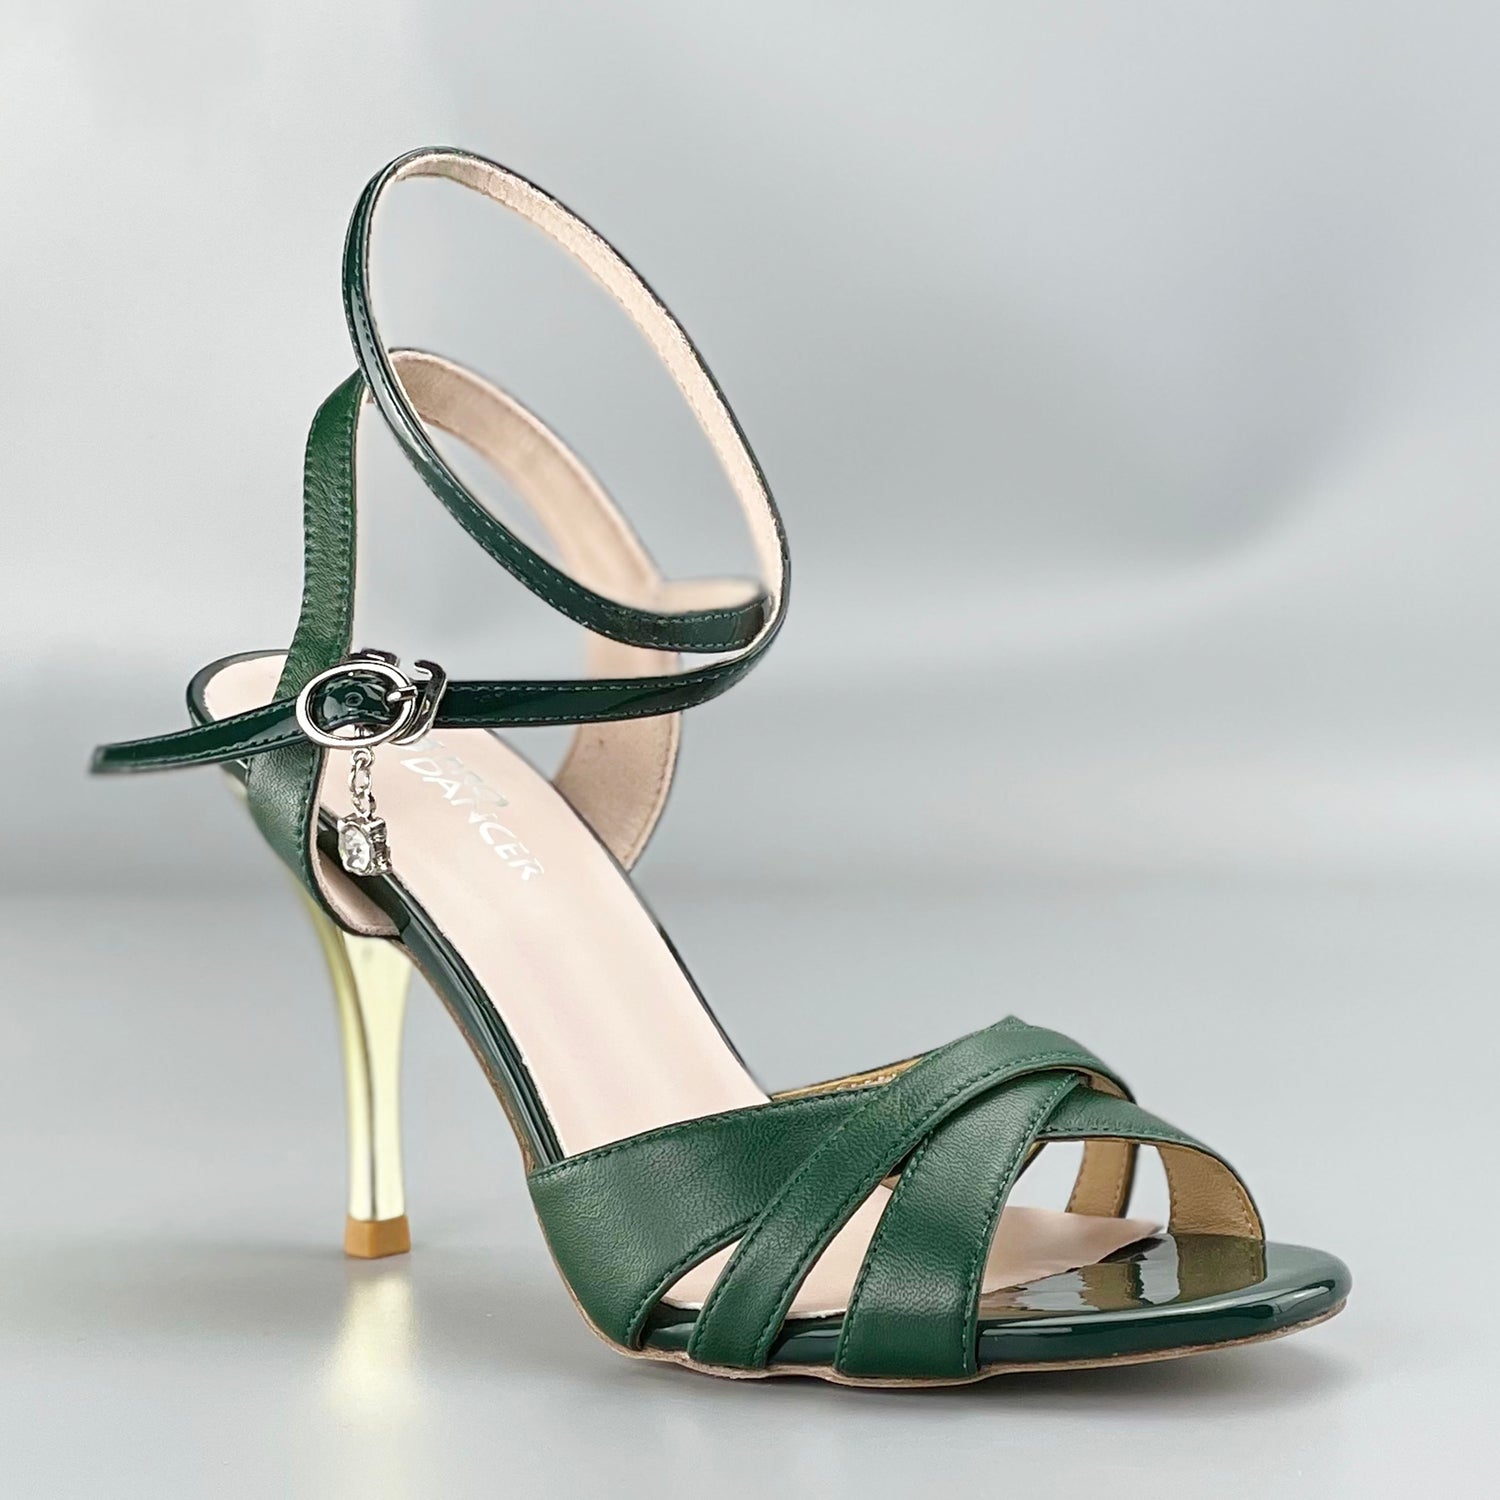 Pro Dancer Peep-toe Argentine Tango Shoes with Closed-back High Heels and Hard Leather Sole in Green2